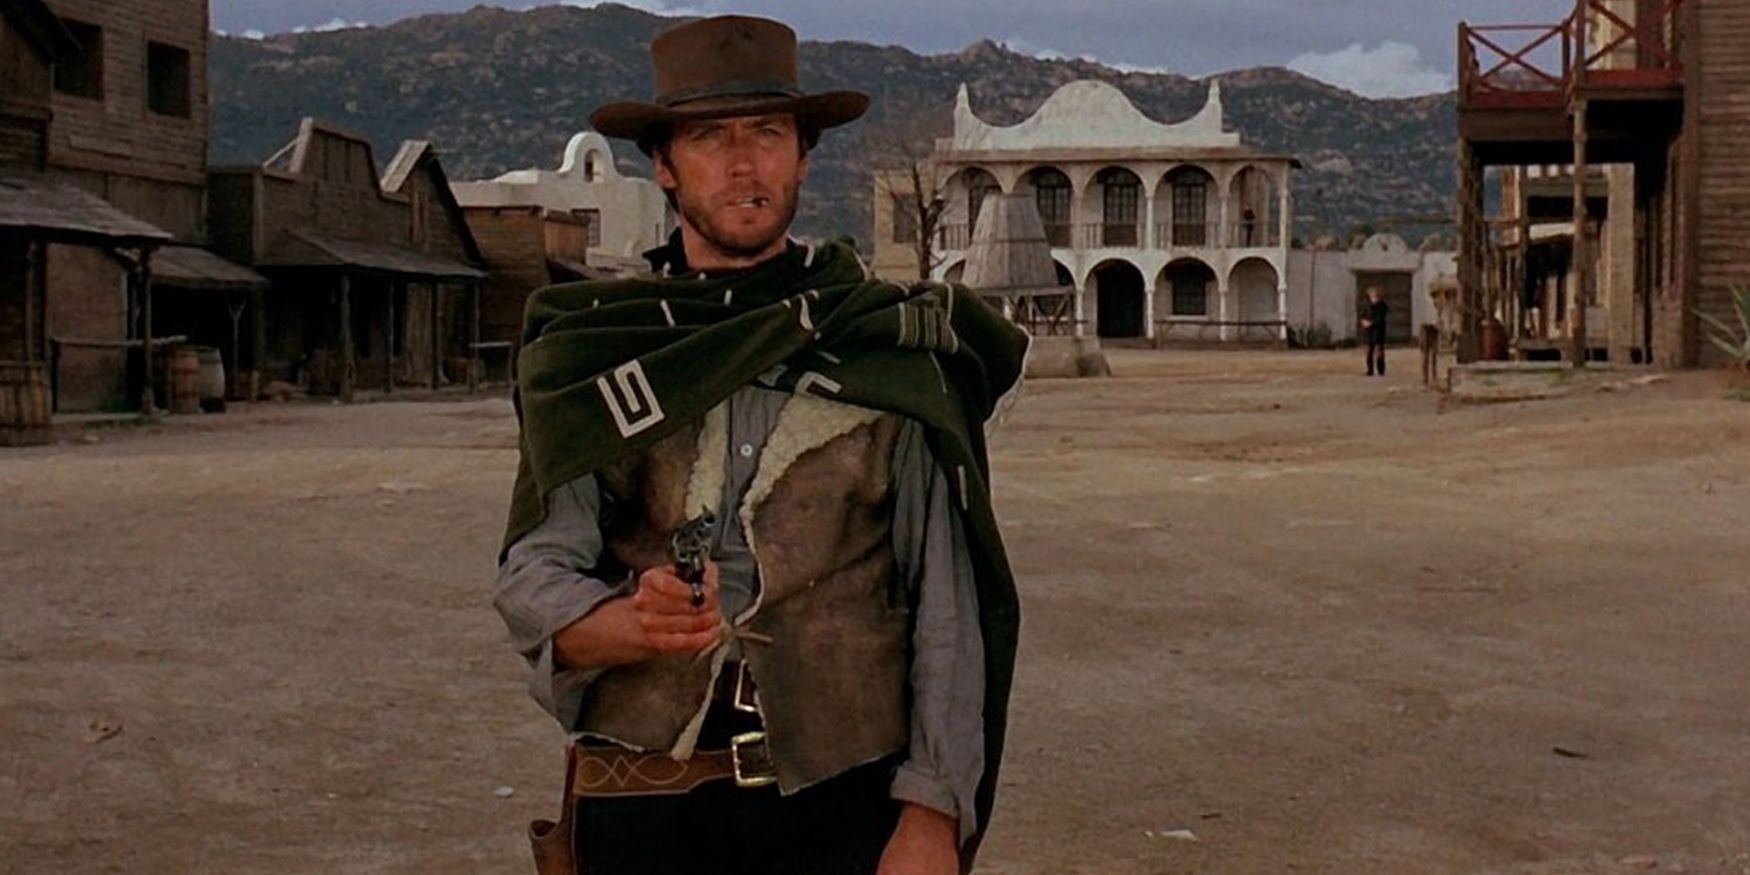 Clint Eastwood as the Man with No Name with a gun in A Fistful of Dollars